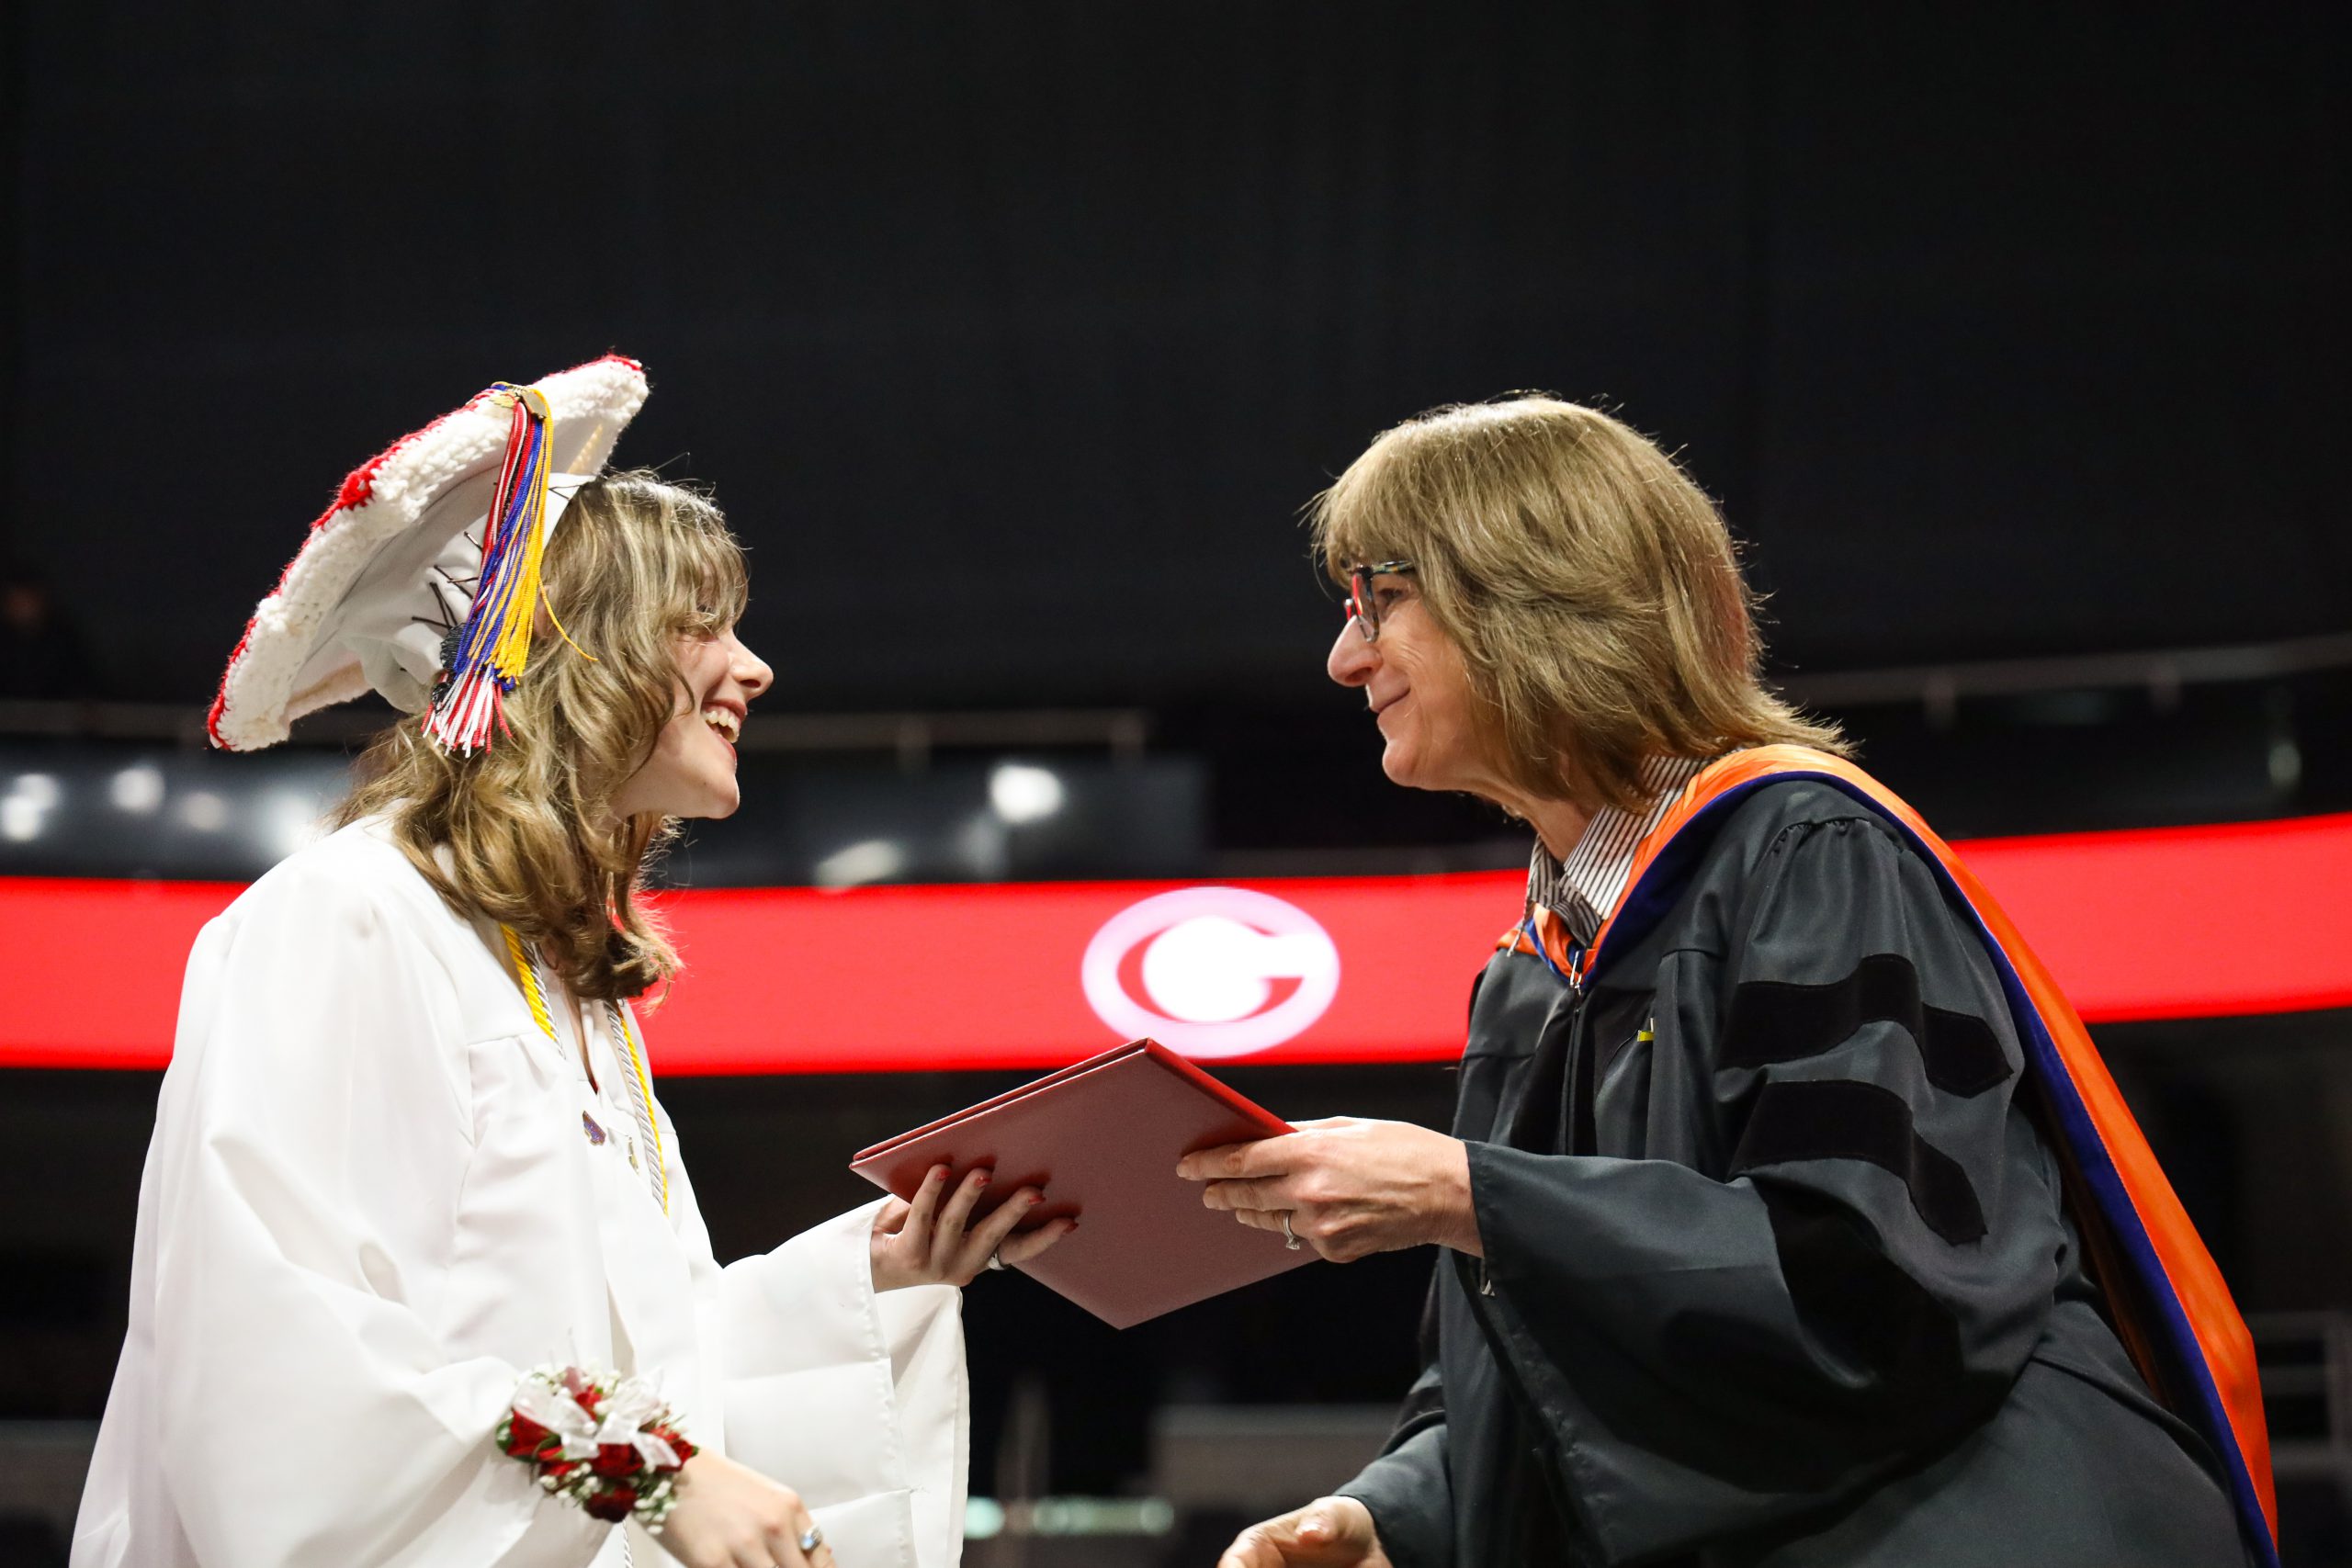 A students wearing a white cap and gown accepts her diploma from the superintendent who is wearing a black gown with an orange hood